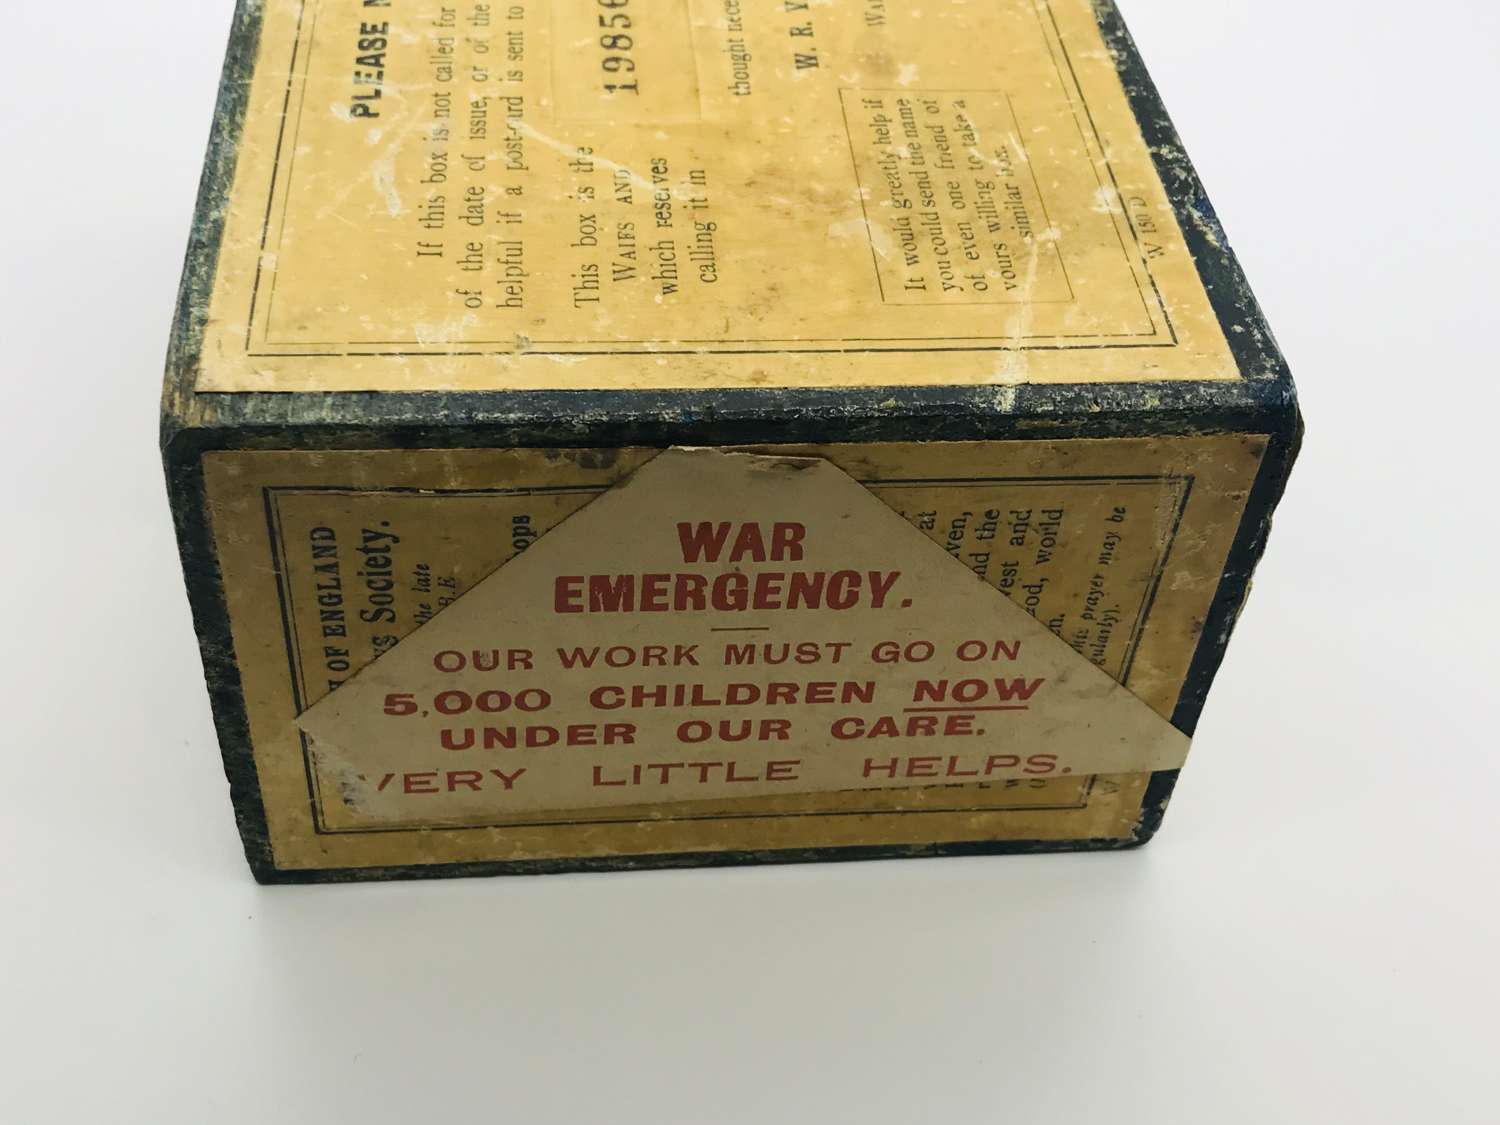 Waifs and strays children’s charity box dated December 1940